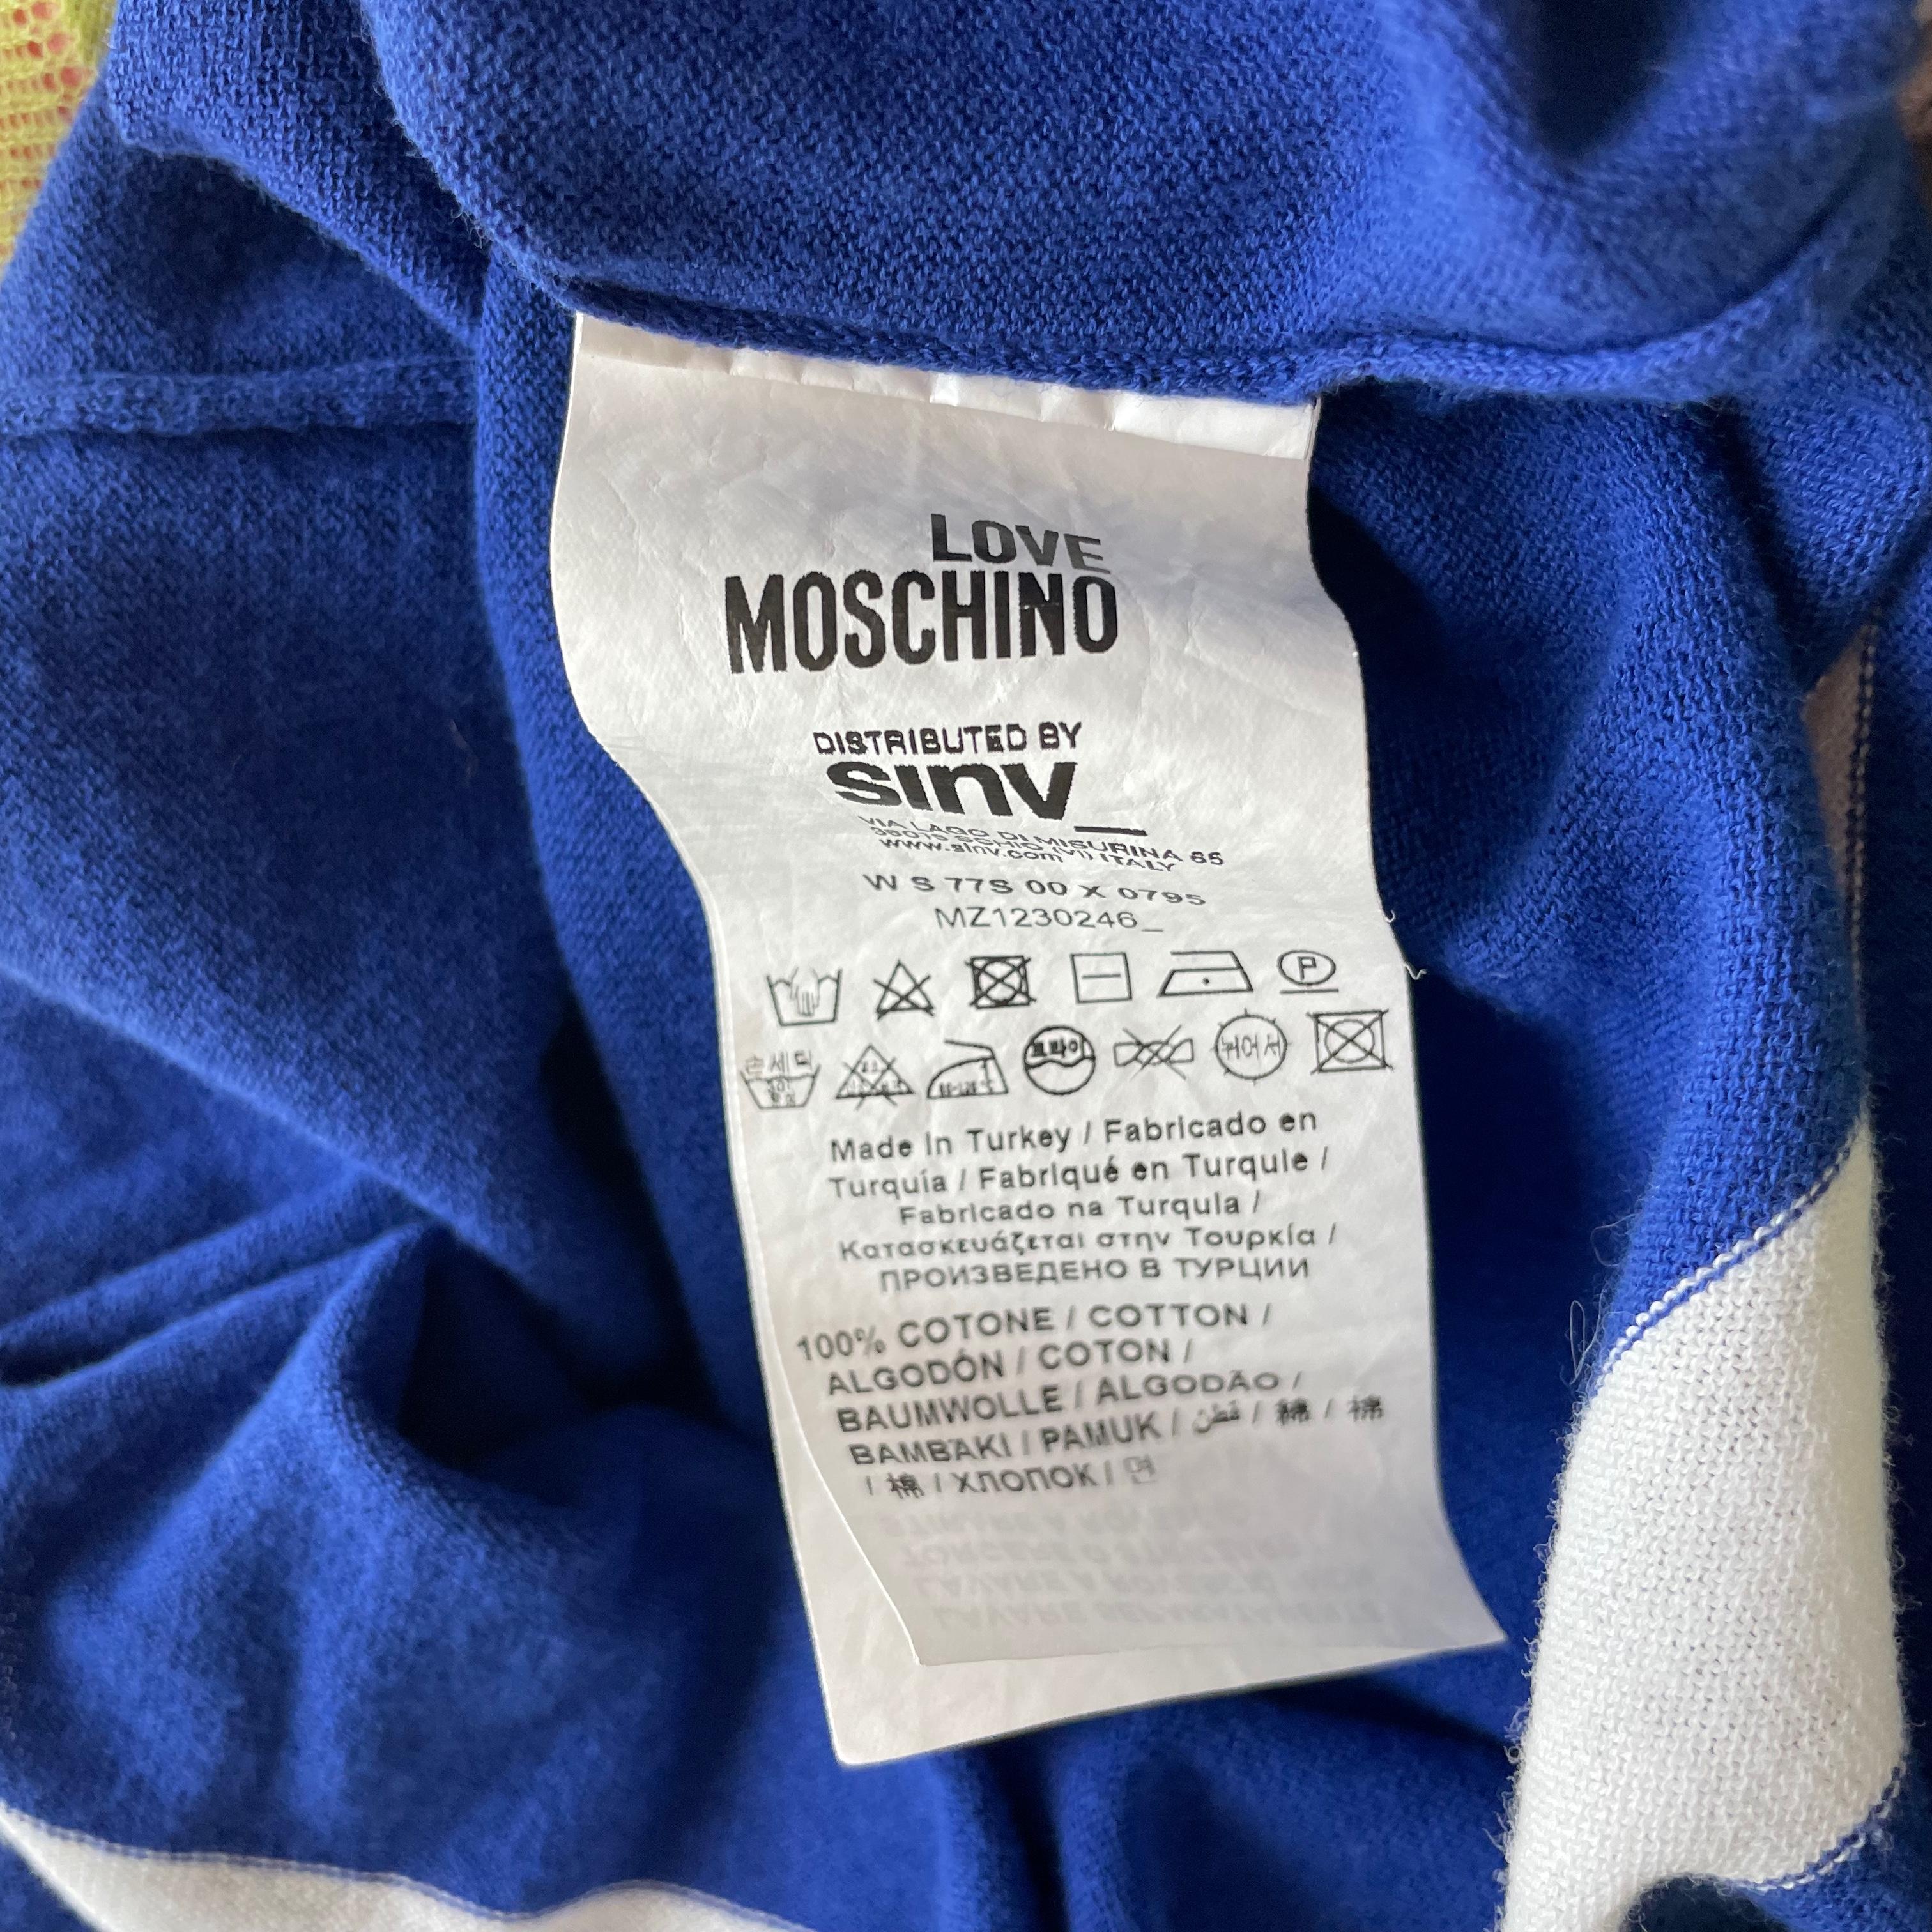 Moschino Maxi Dress Color Block All Stars Pink Blue Cotton Knit Sweater Sz 2 For Sale 6